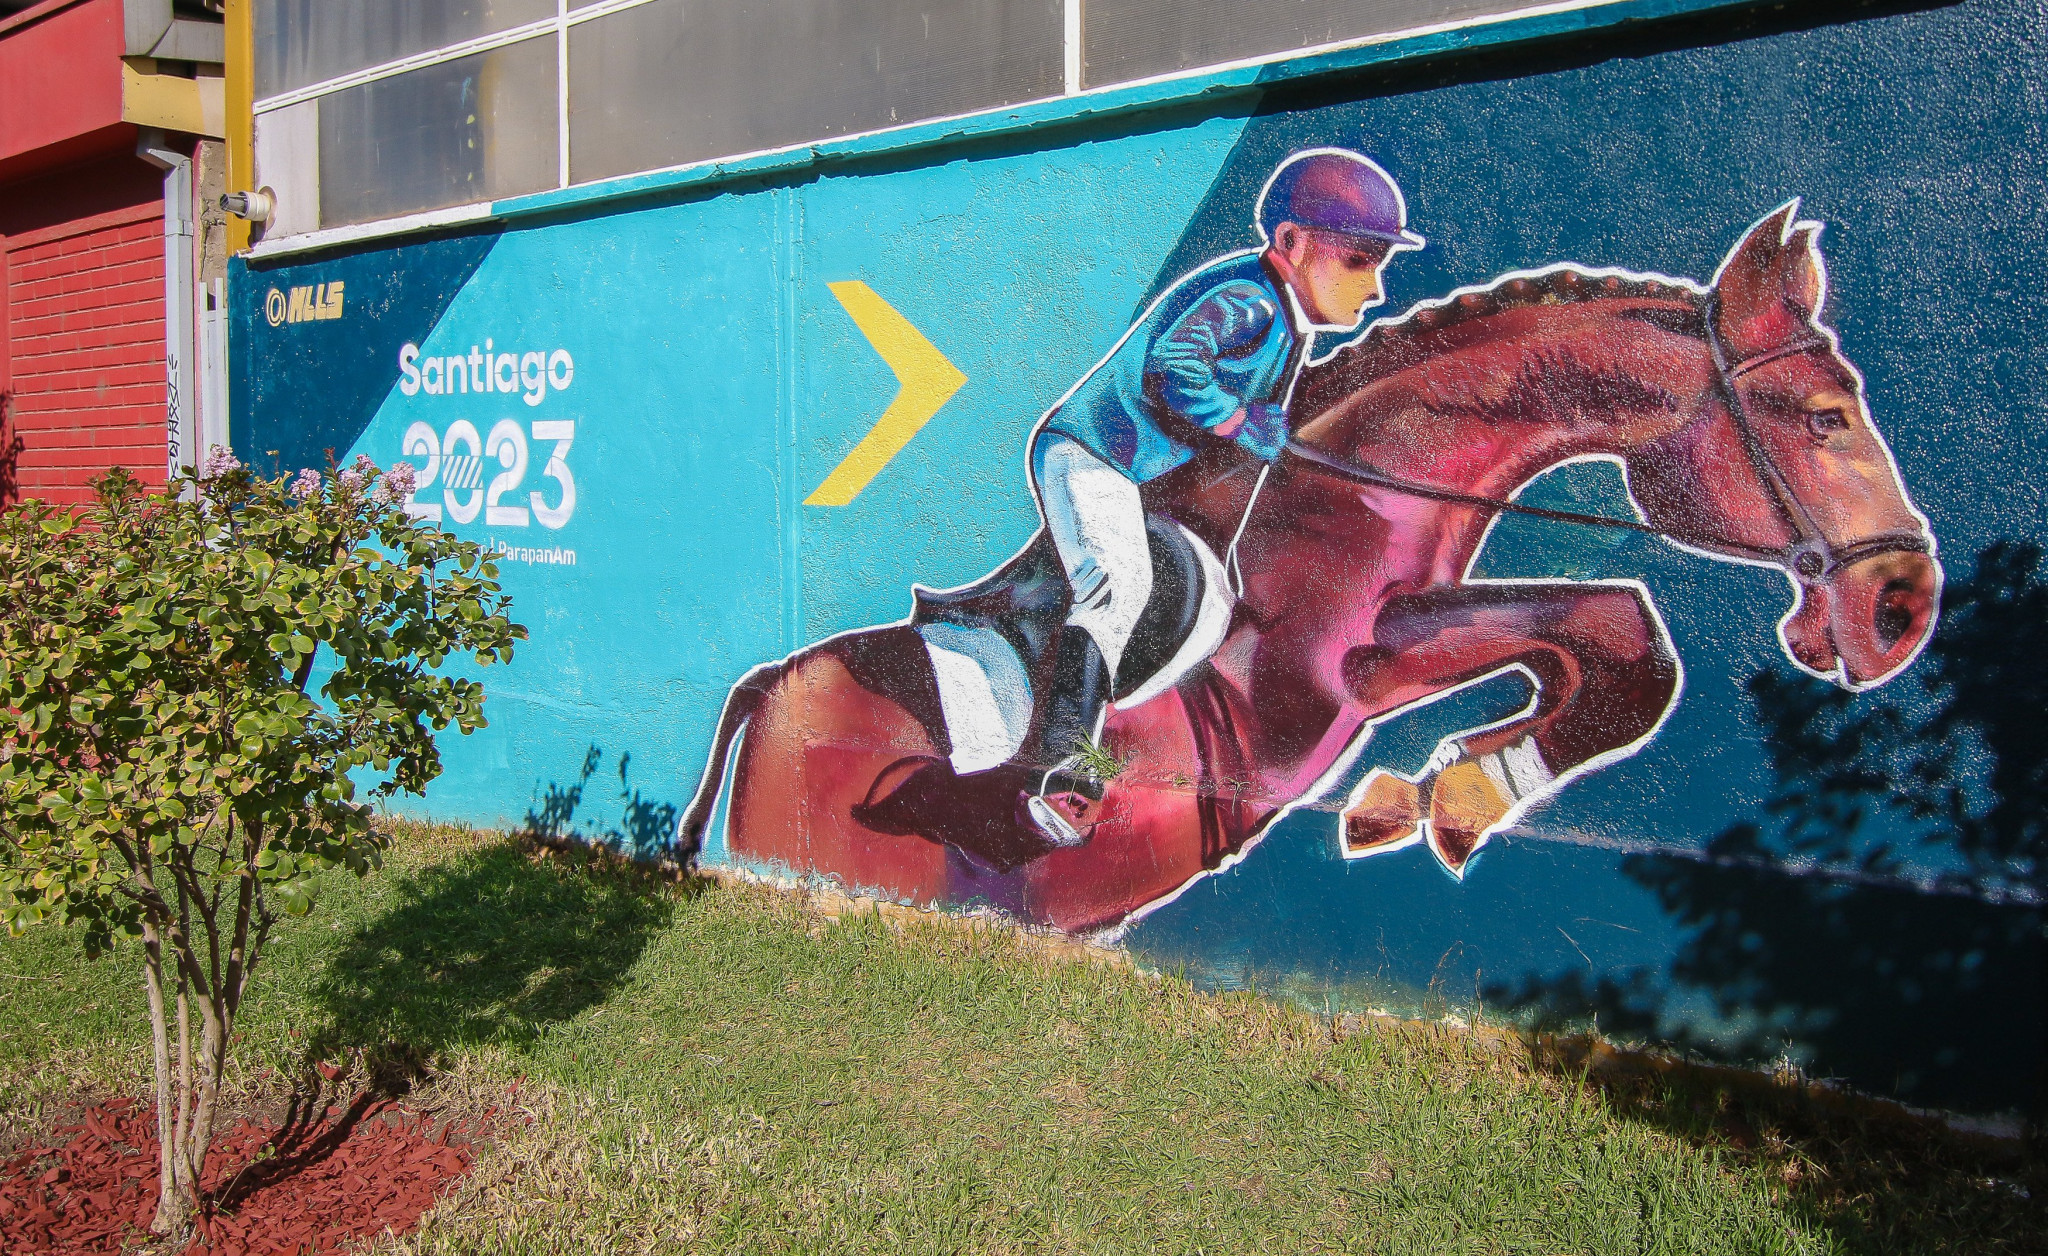 Mural unveiled at Santiago 2023 equestrian venue honouring 74-year world record